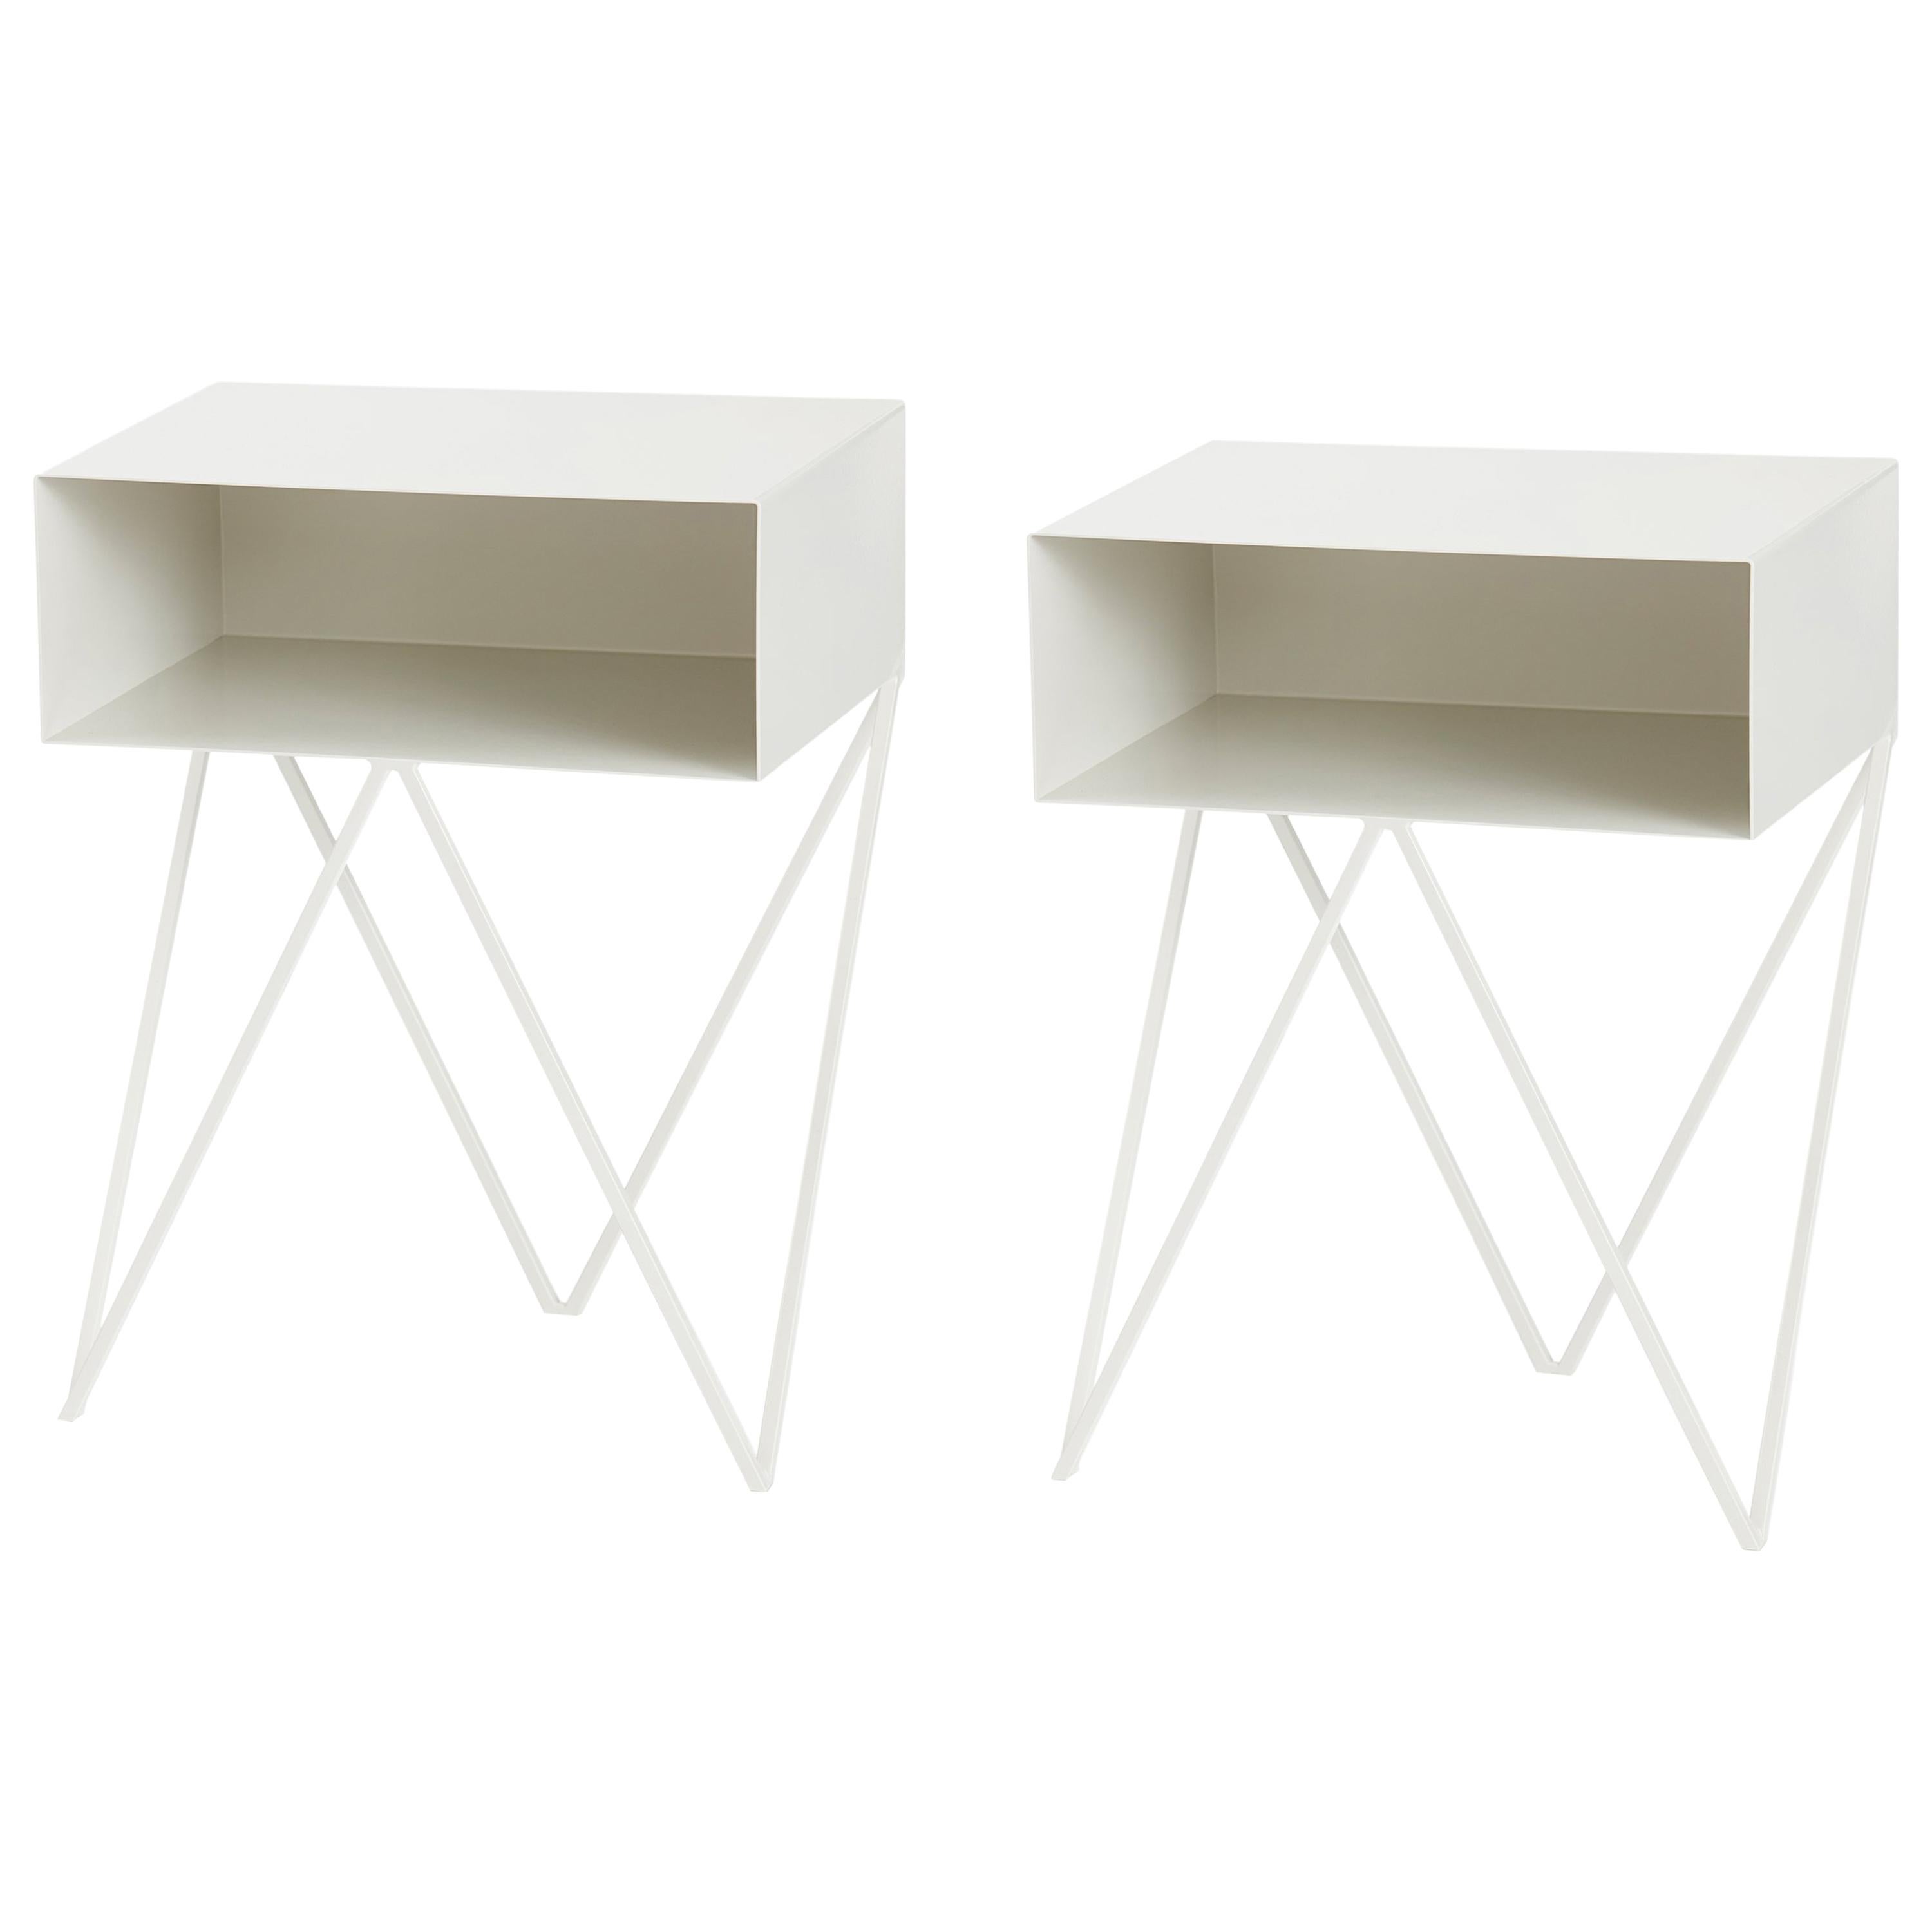 Pair of Paper White Steel Robot Bedside Tables - Customisable For Sale